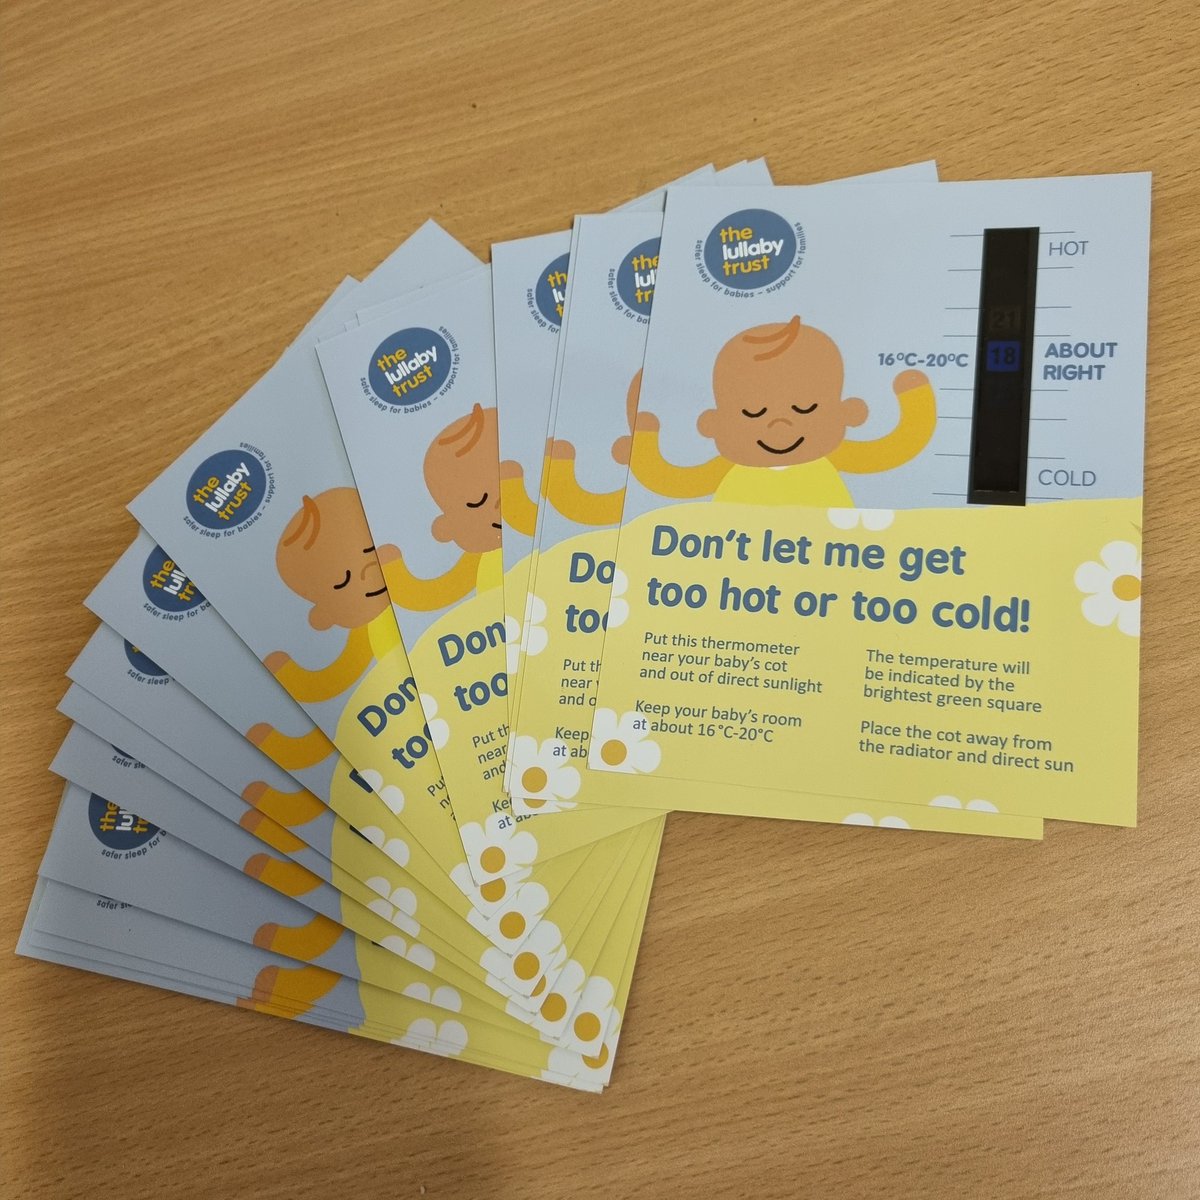 Coming soon to a maternity unit near you! #SafeSleep video to coincide with the distribution of free room thermometers. Keeping Bradford District & Craven babies safe this winter @ActAsOneBDC @LullabyTrust @BradfordBirth @AmandaS44006393 @keogh_sara  @SarahSi86837955 @BTHFT